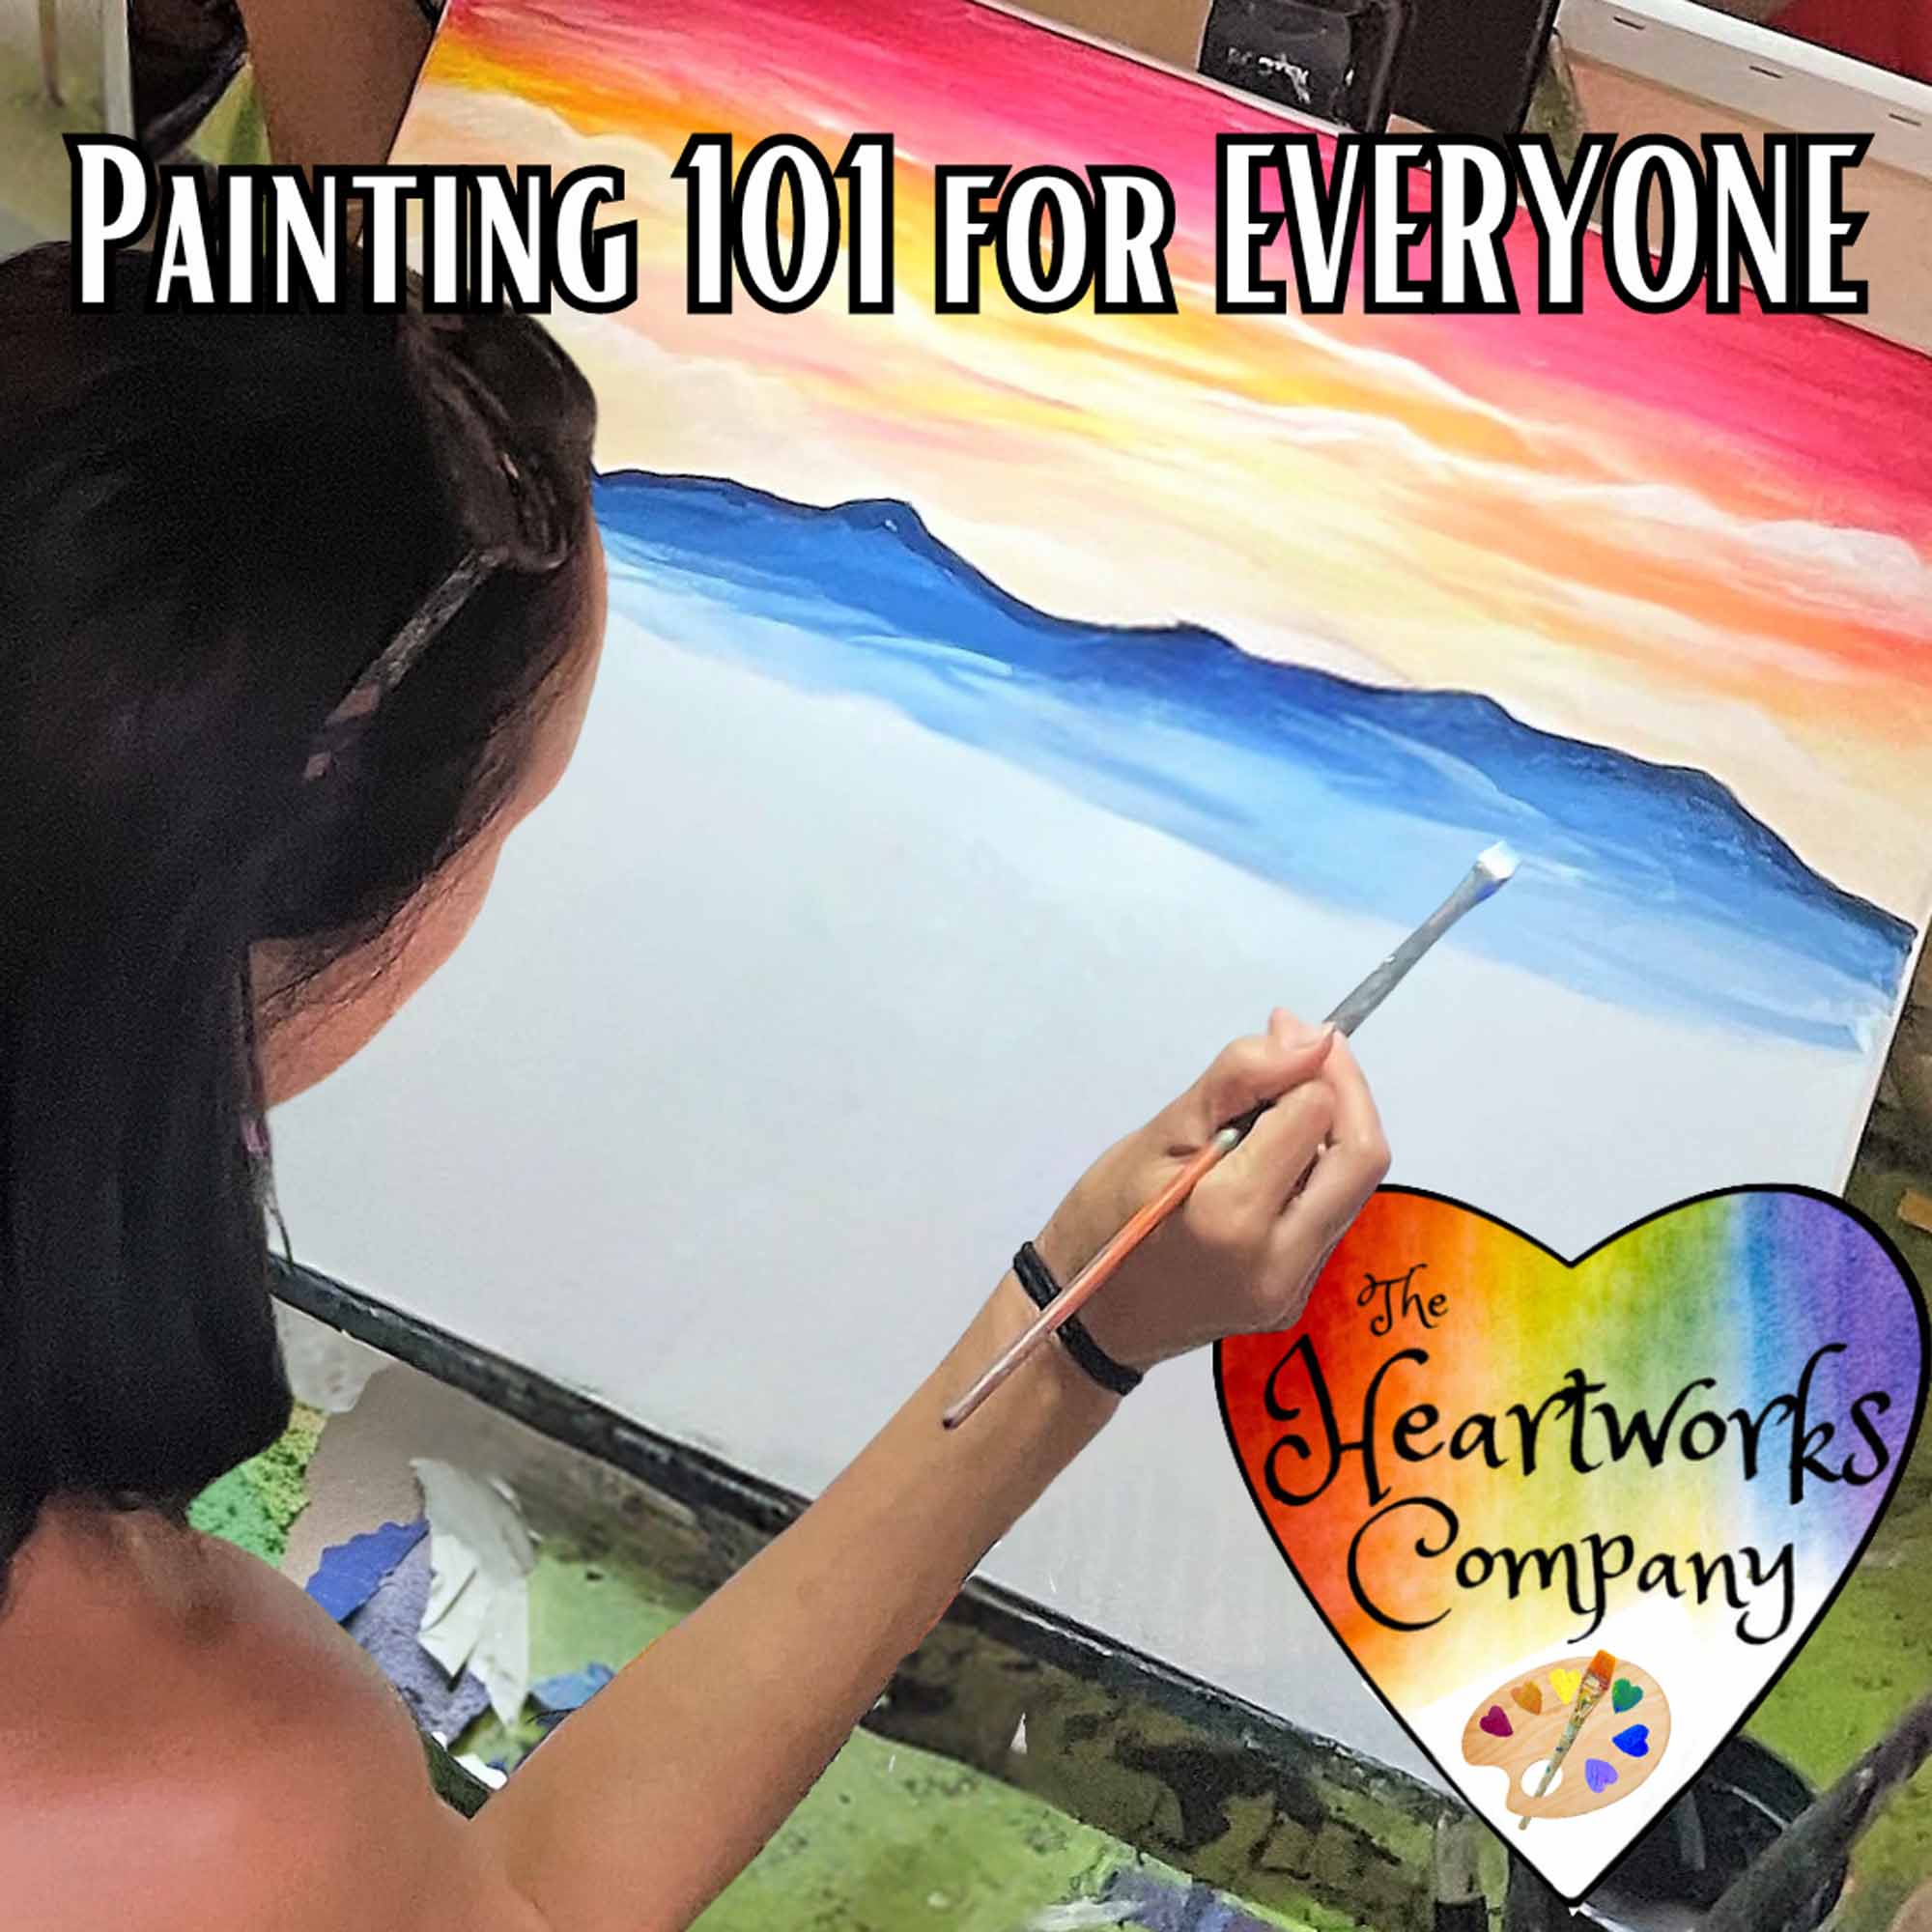 Painting 101 for EVERYONE: Creative Bliss Behind the Canvas for the Whole Neighborhood